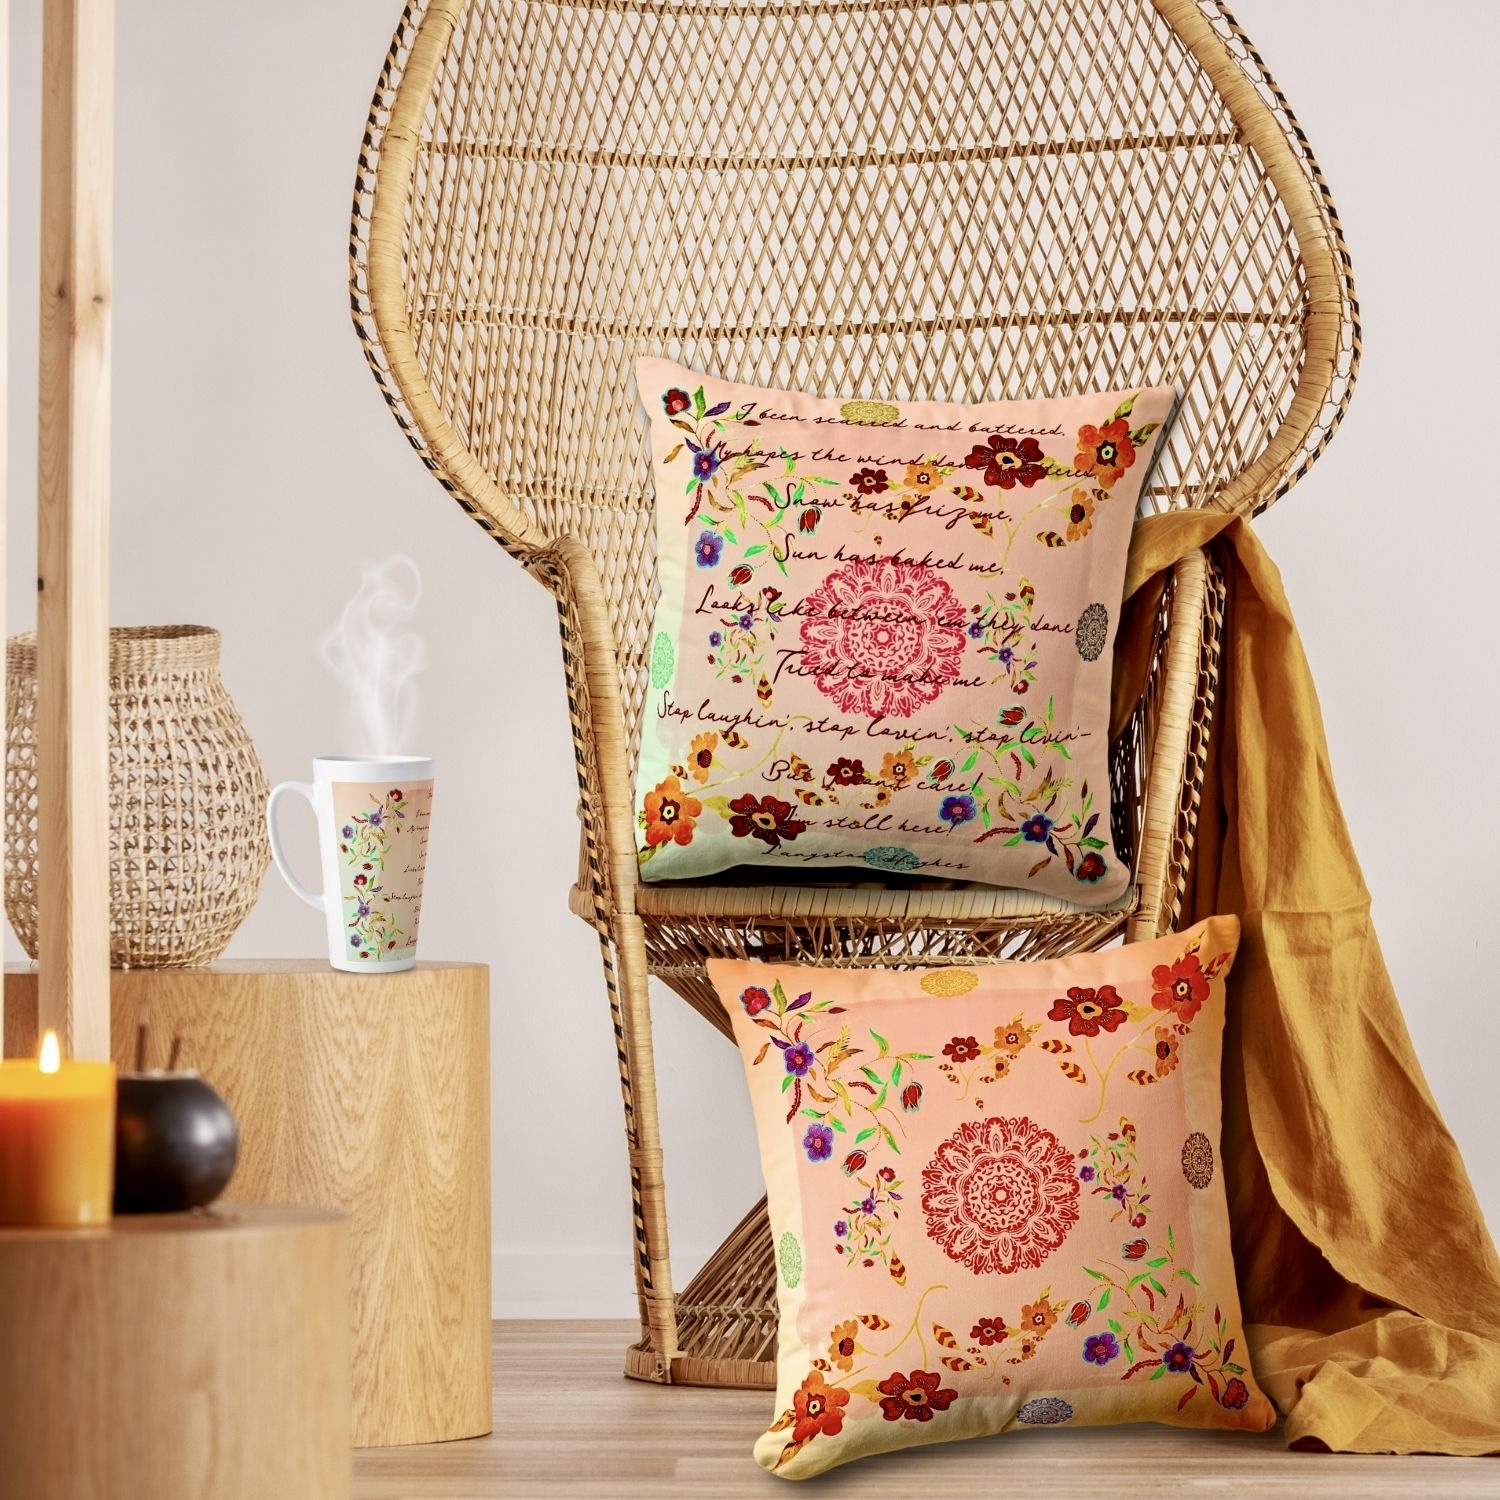 Tranquil mug and matching throw pillow adorned with delicate watercolor flower designs and featuring an excerpt from Langston Hughes' poem 'Still Here'.